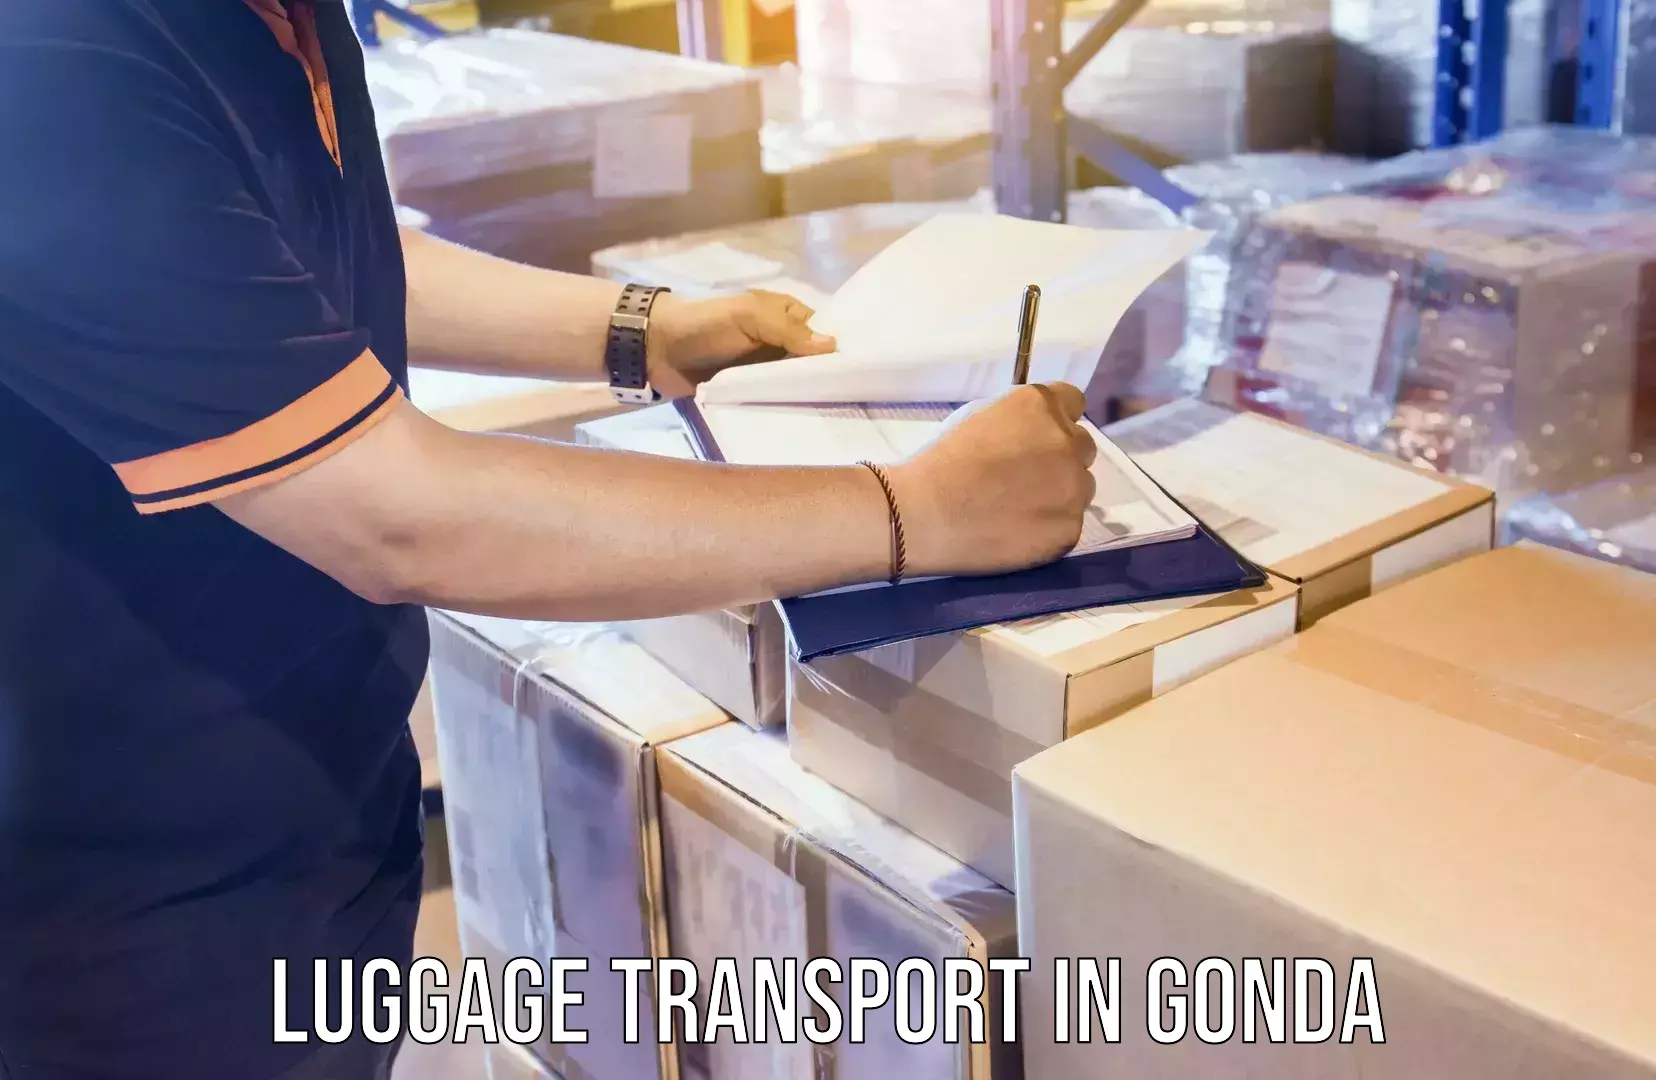 Luggage transport guidelines in Gonda